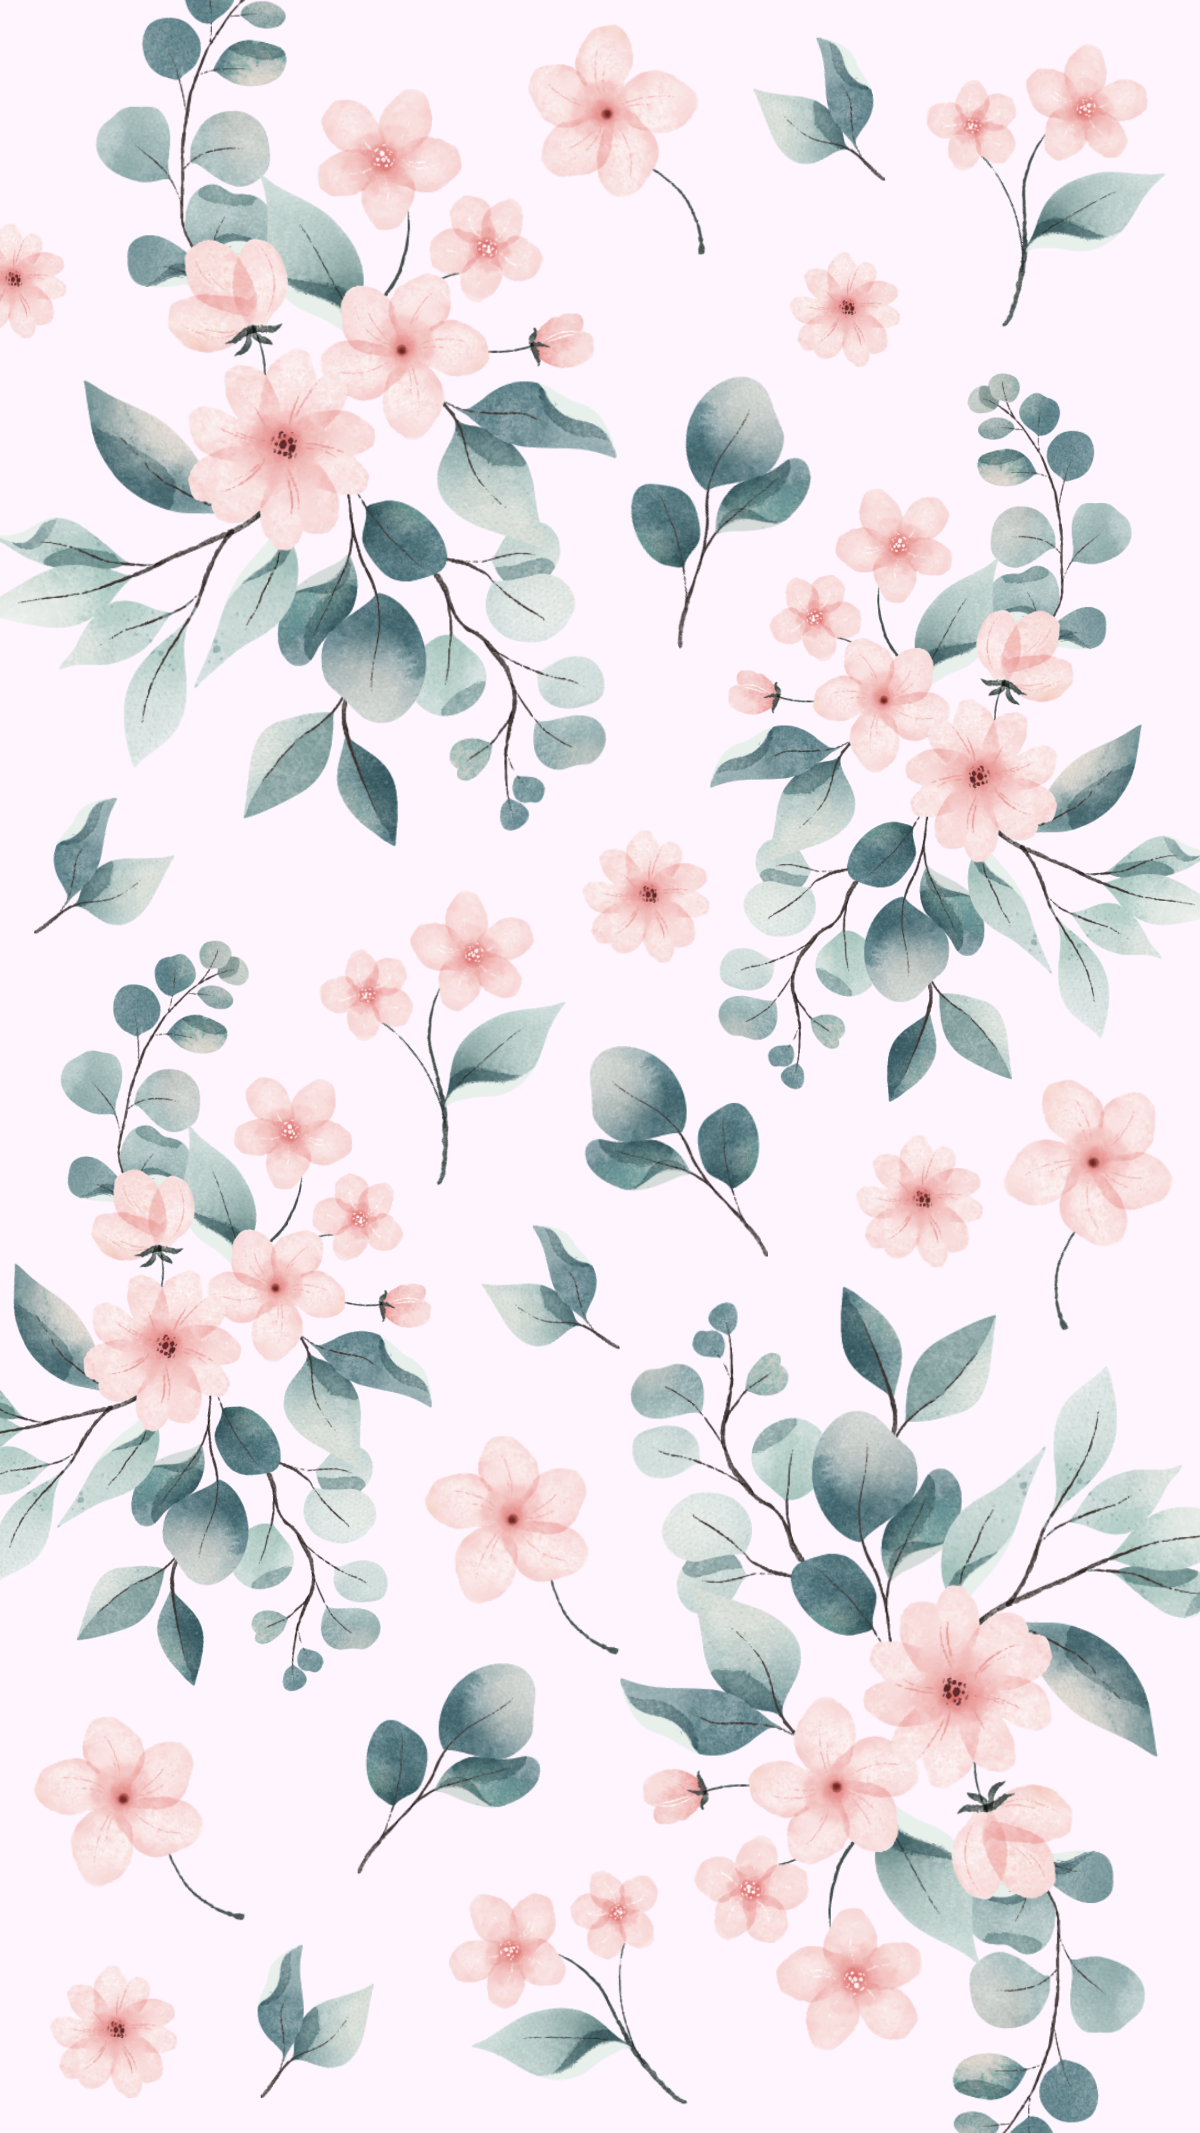 Watercolor iPhone Floral Background